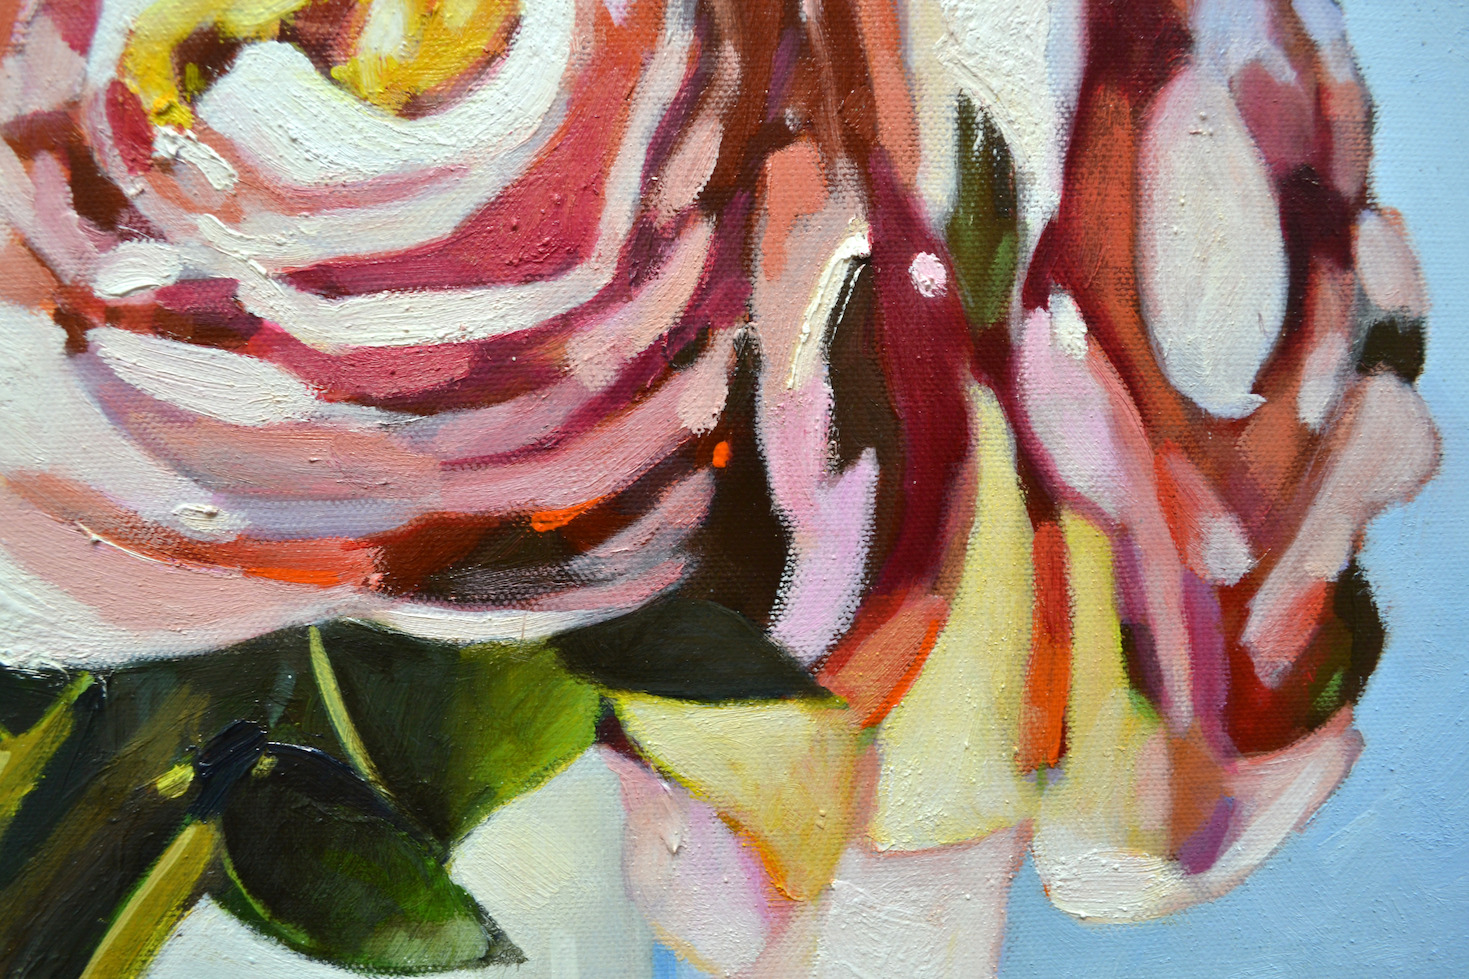 Close Up Detail Of Oil Painting "Peonies with Decorative Pear" By Judith Dalozzo